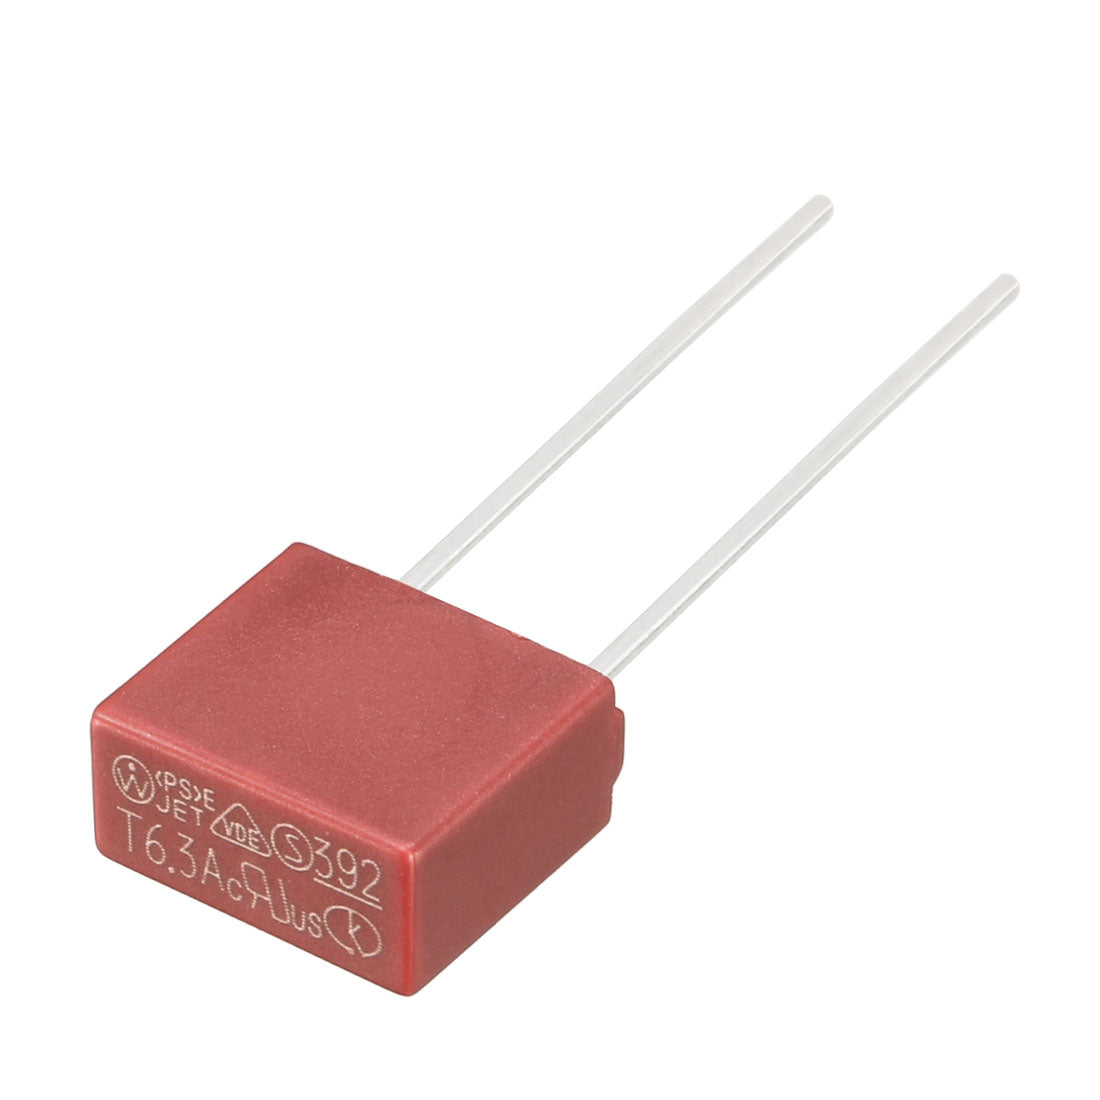 uxcell Uxcell 20Pcs DIP Mounted Miniature Square Slow Blow Micro Fuse T6.3A 6.3A 250V Red